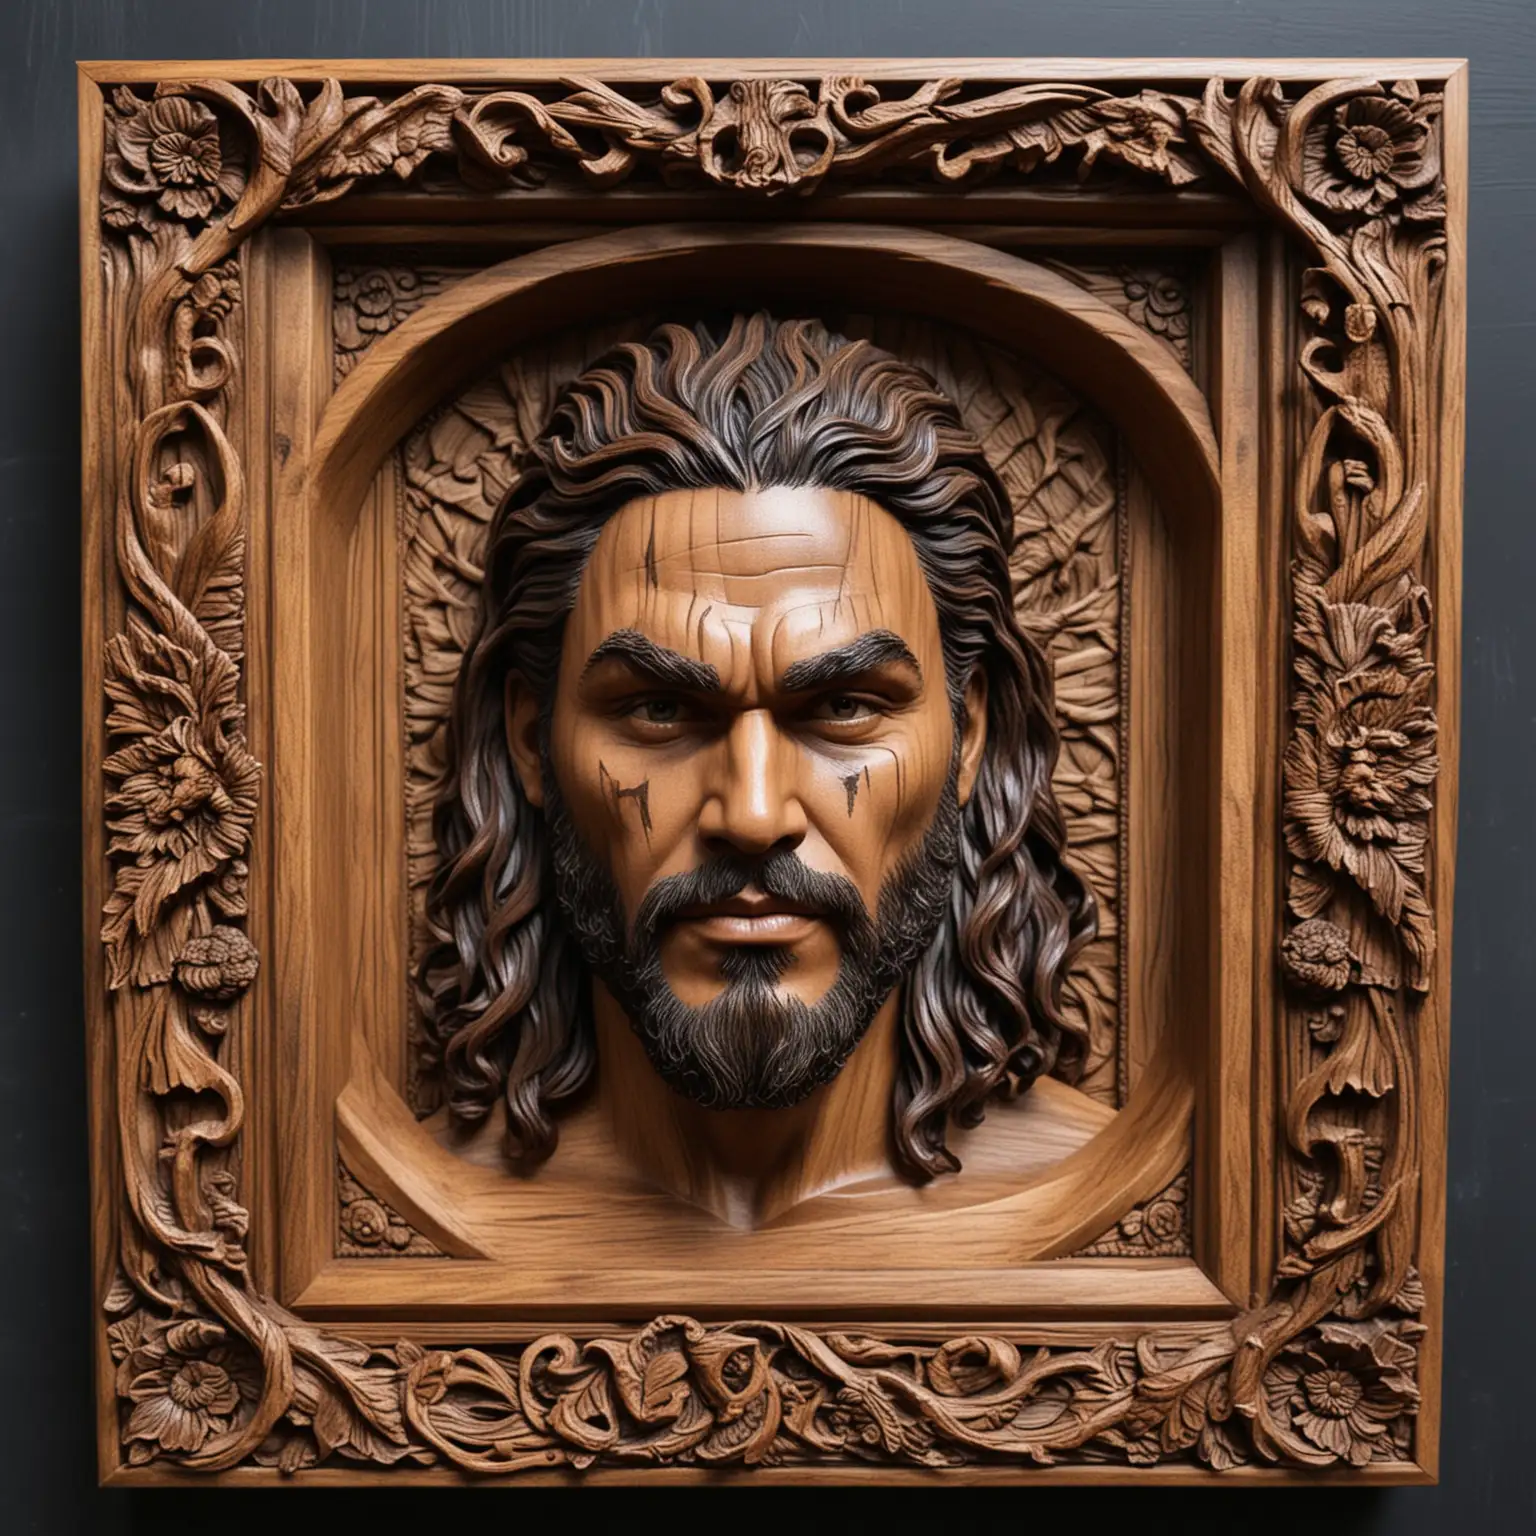 Jason Momoa as a Game of Thrones Character 3D Wood Carving in Dark Wood Frame